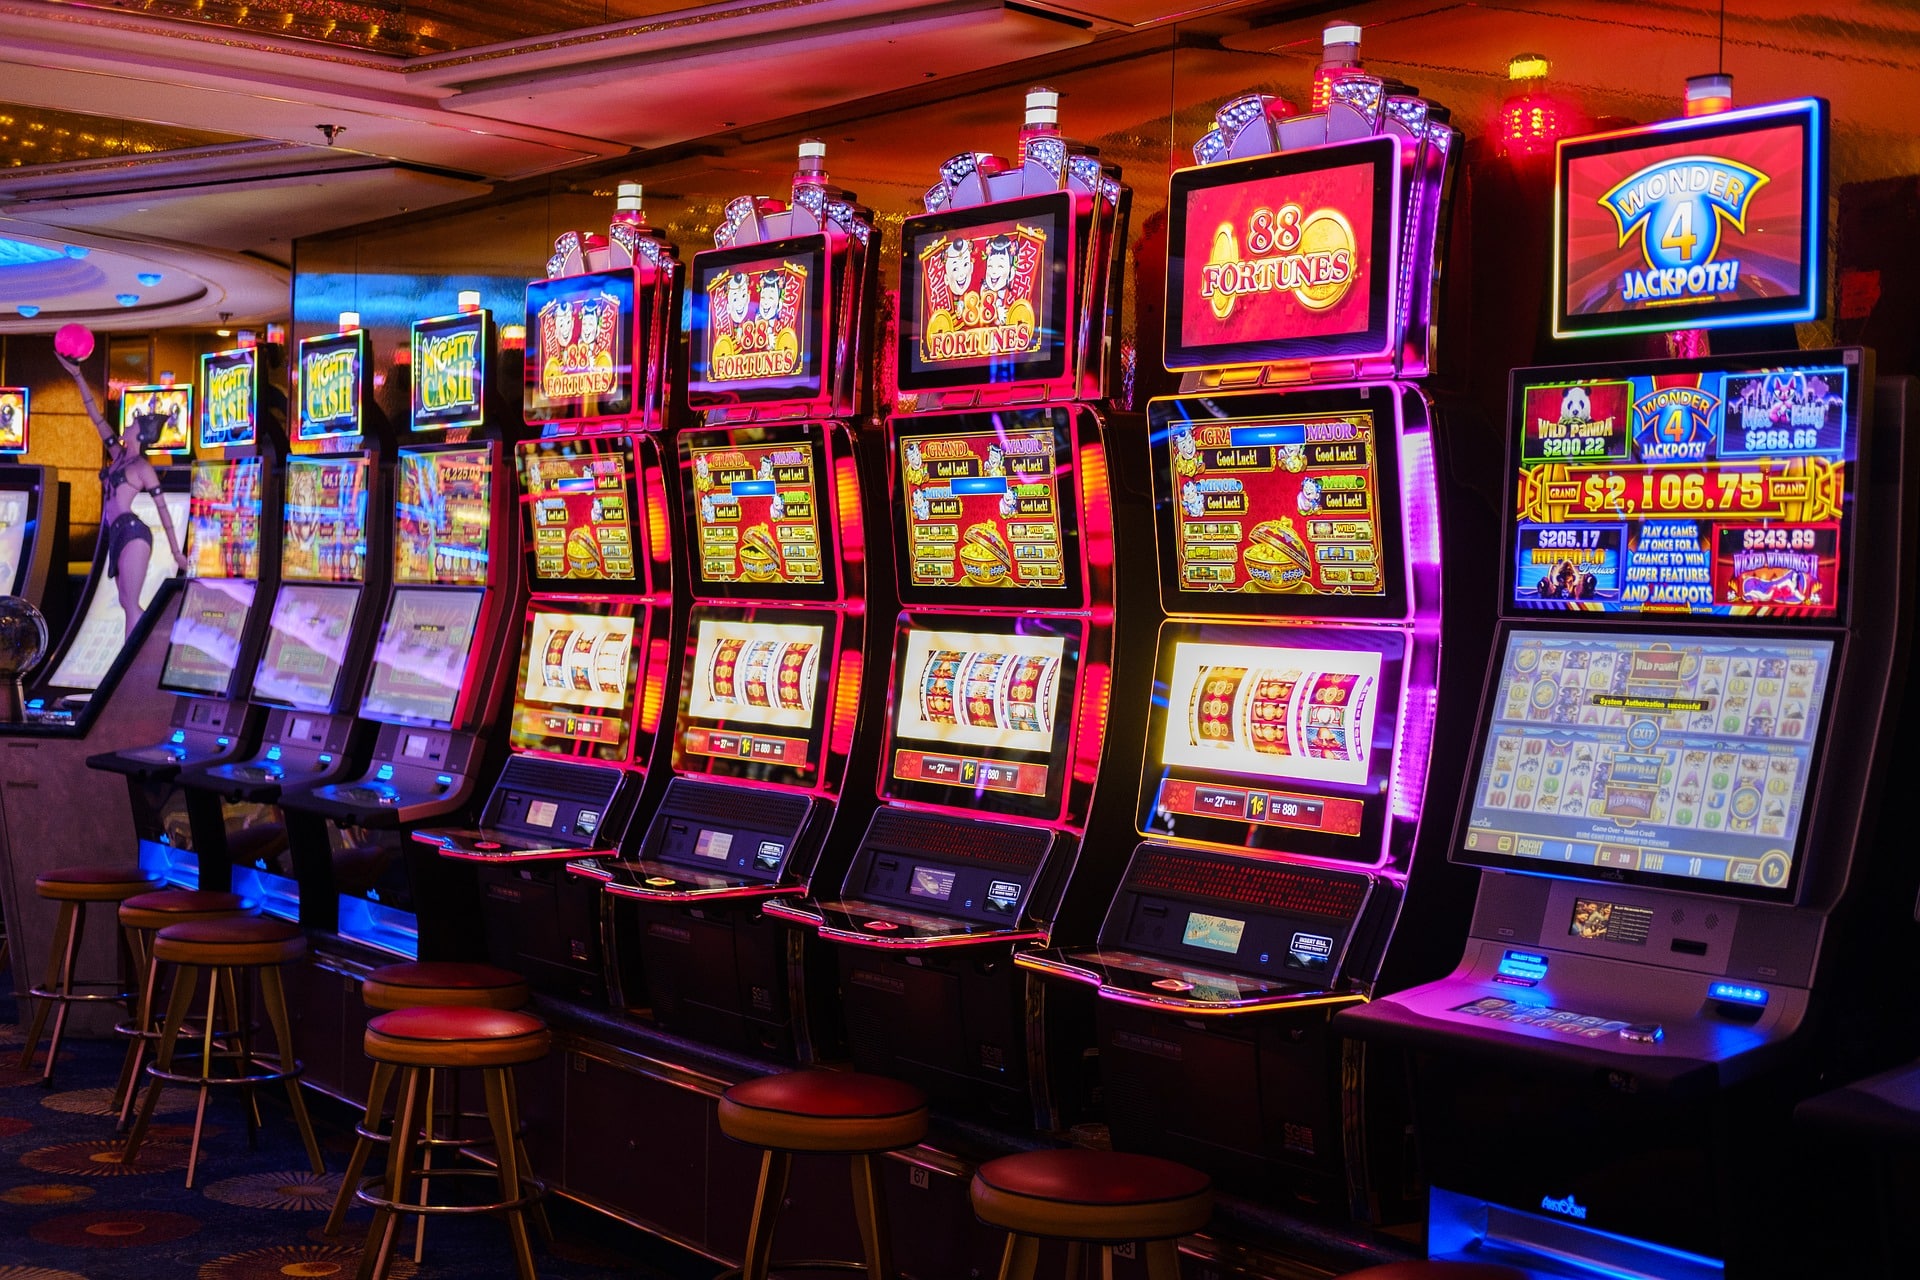 There is a “Slot Machine Teaching Guide” about Slot Machine Online Casino